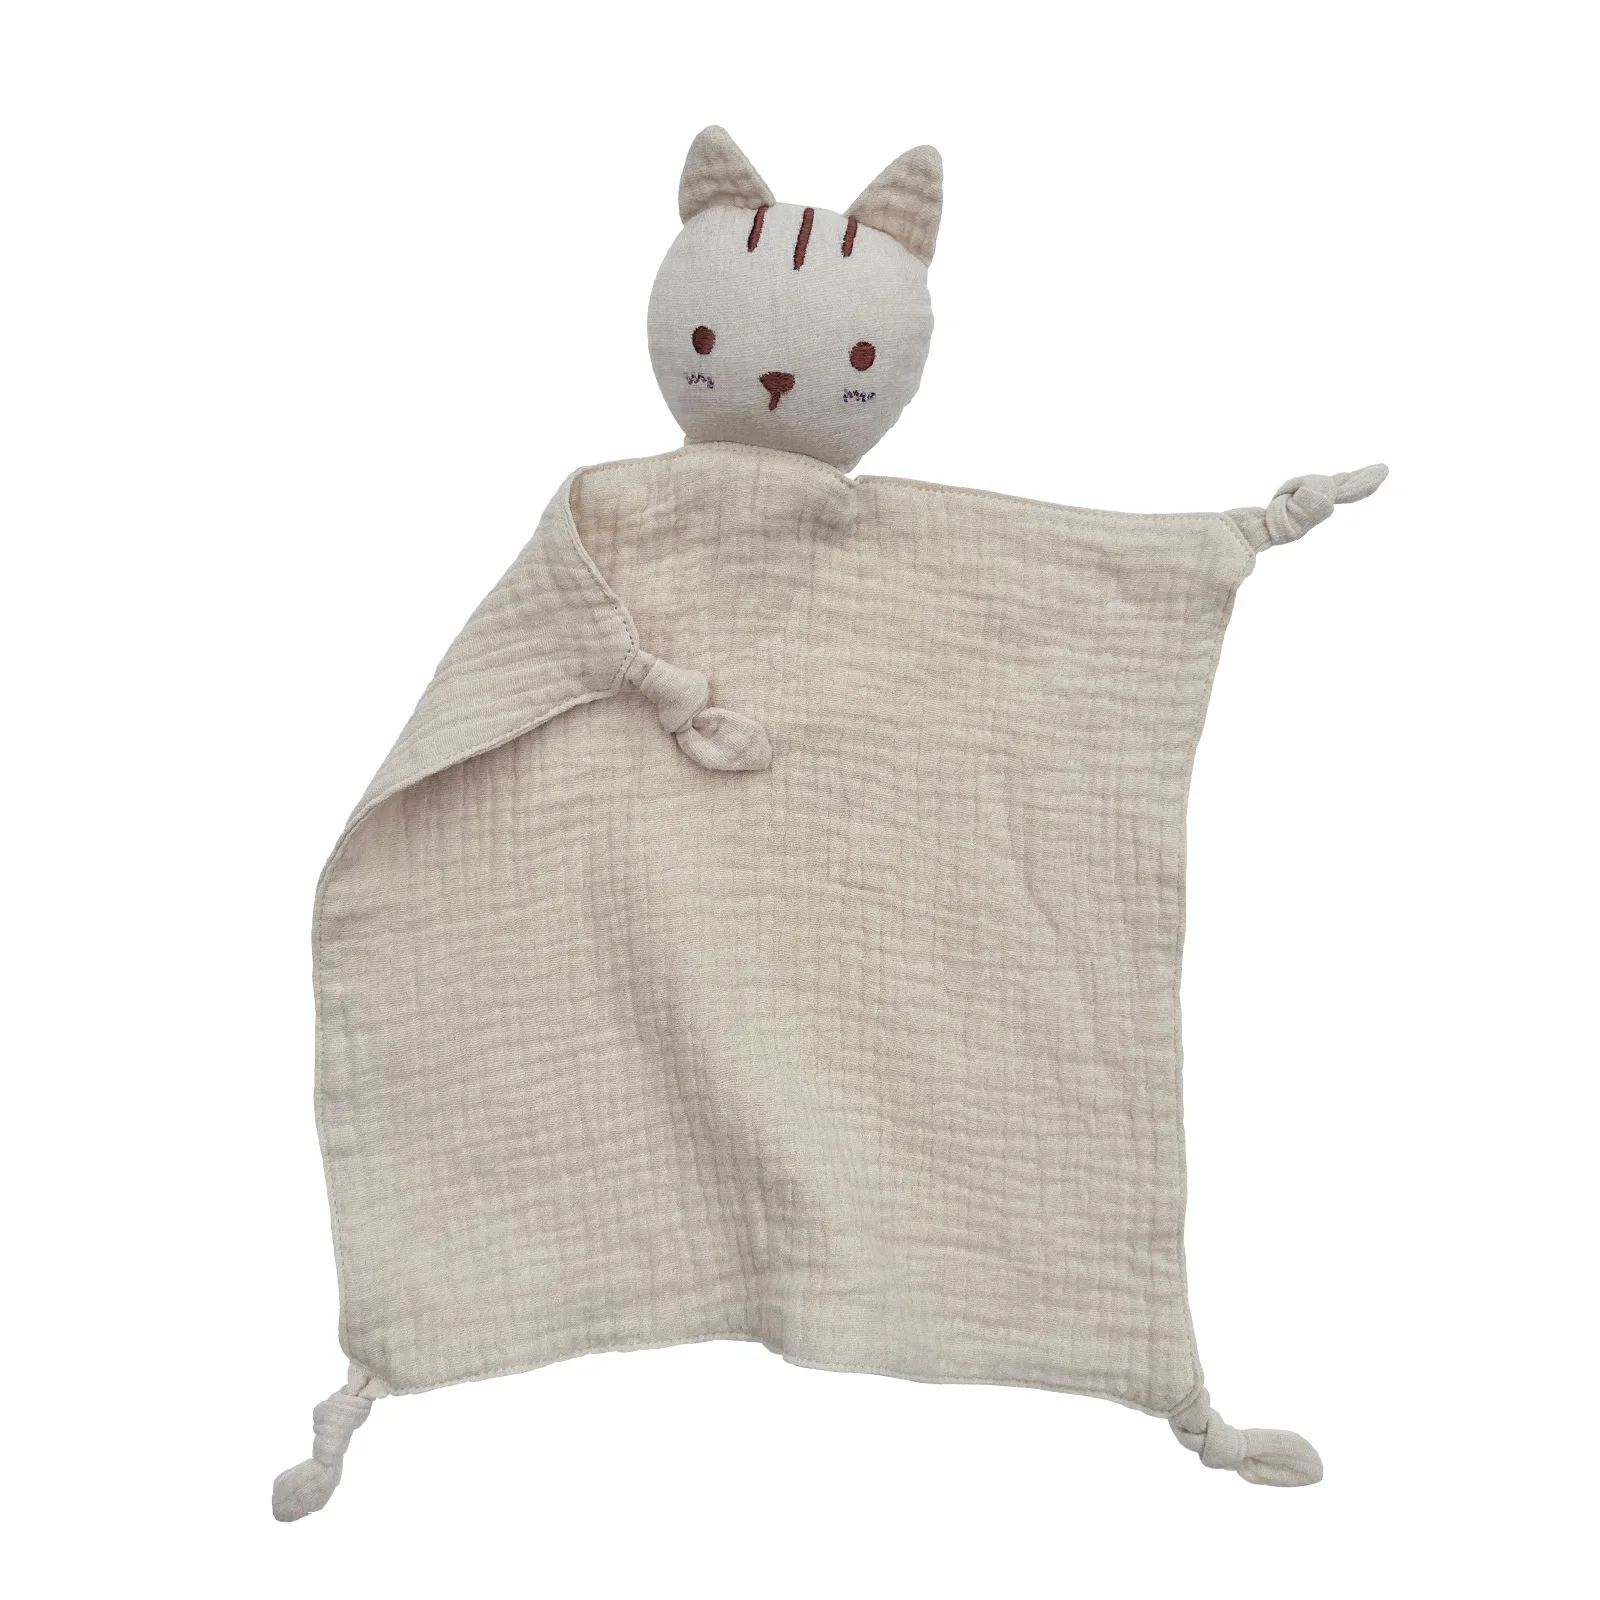 Sweet Cat Lovey Baby Security Blanket Organic Cotton Muslin Comfort Security Blanket for Babies